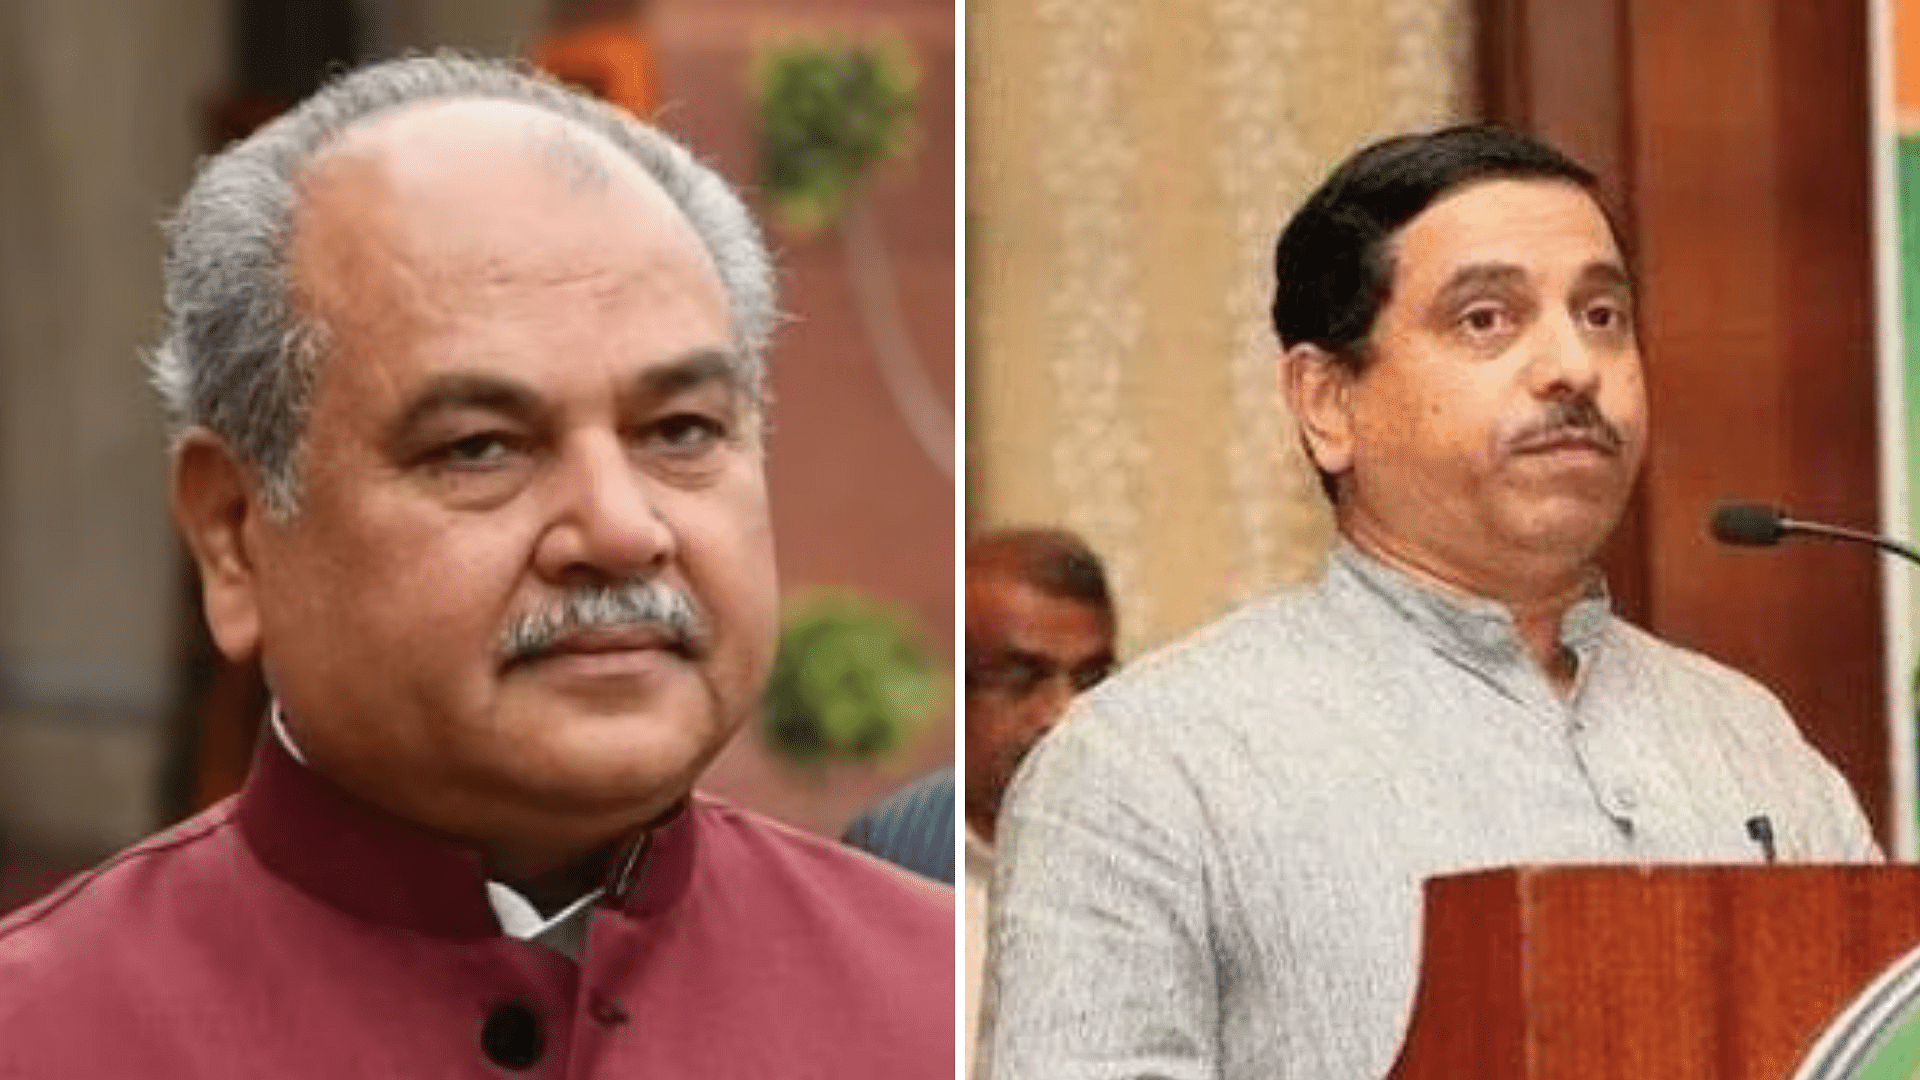 <div class="paragraphs"><p>Union ministers Prahlad Joshi and Narendra Singh Tomar will visit the state on Sunday, 12 September, as the Bharatiya Janata Party's (BJP) central observers.</p></div>